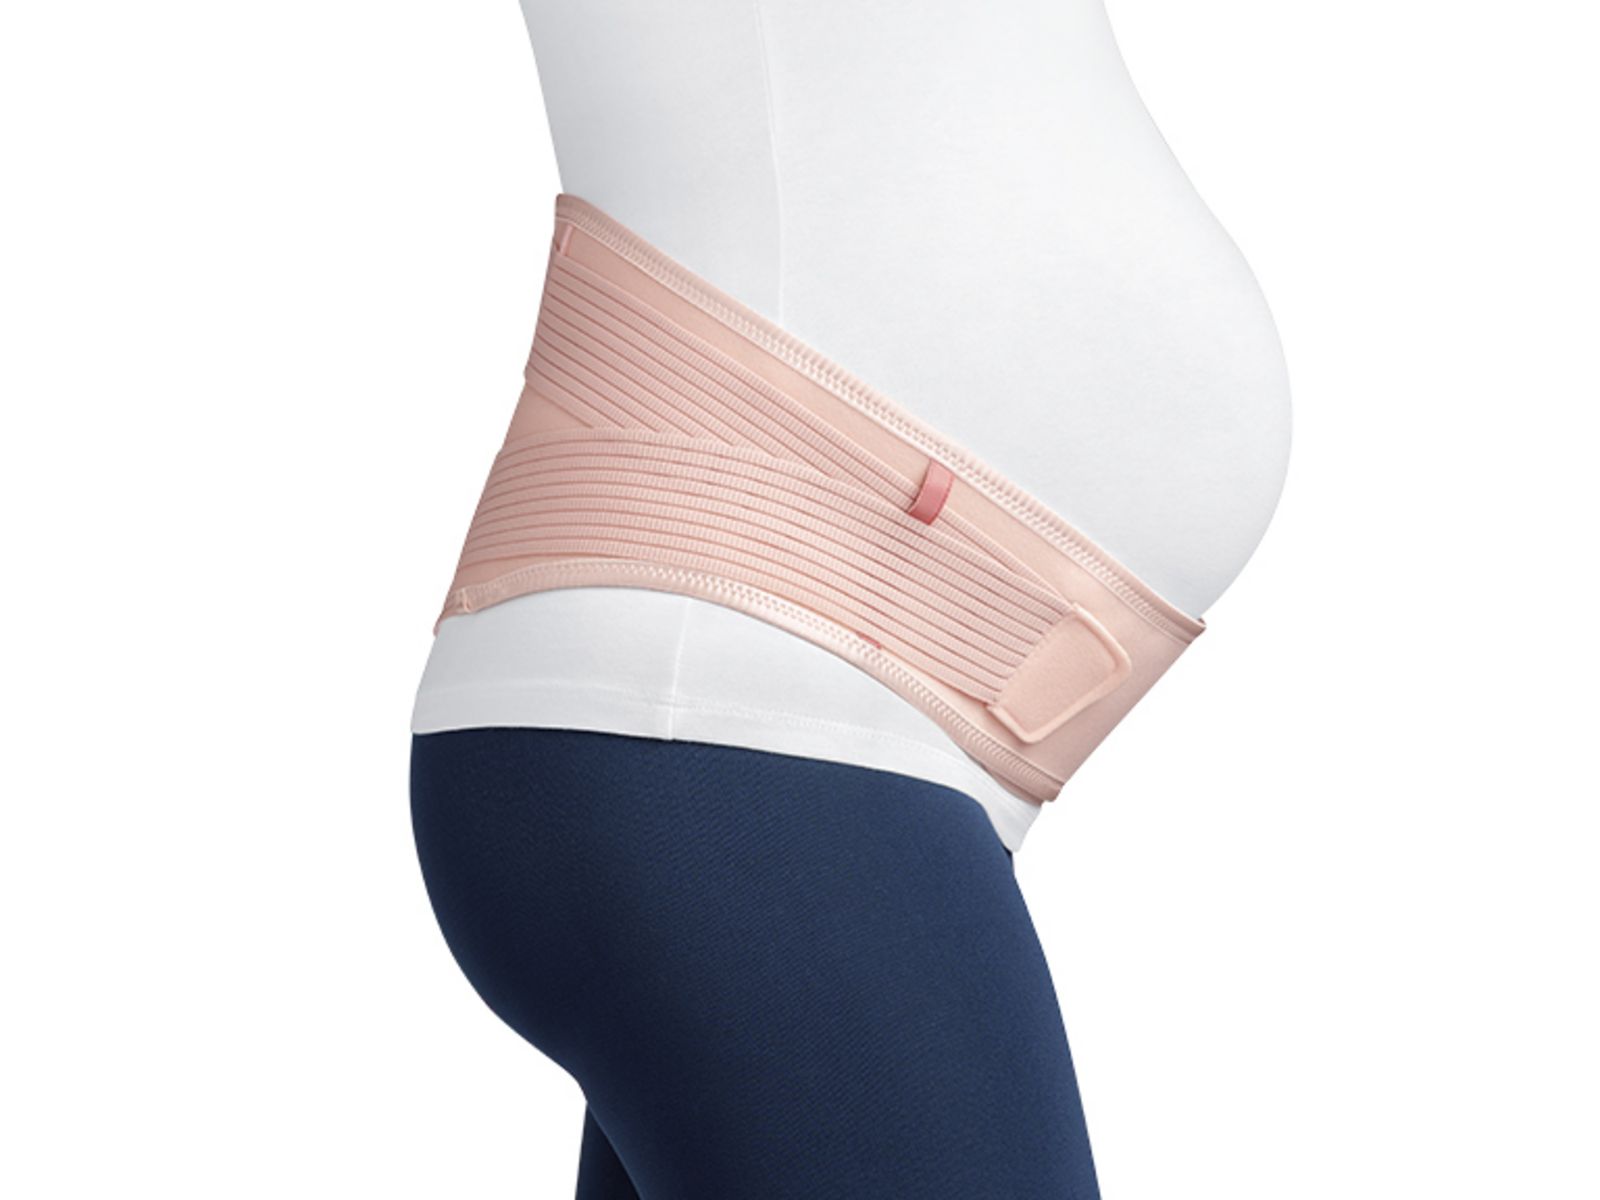 Jobst Maternity Compression Size Chart